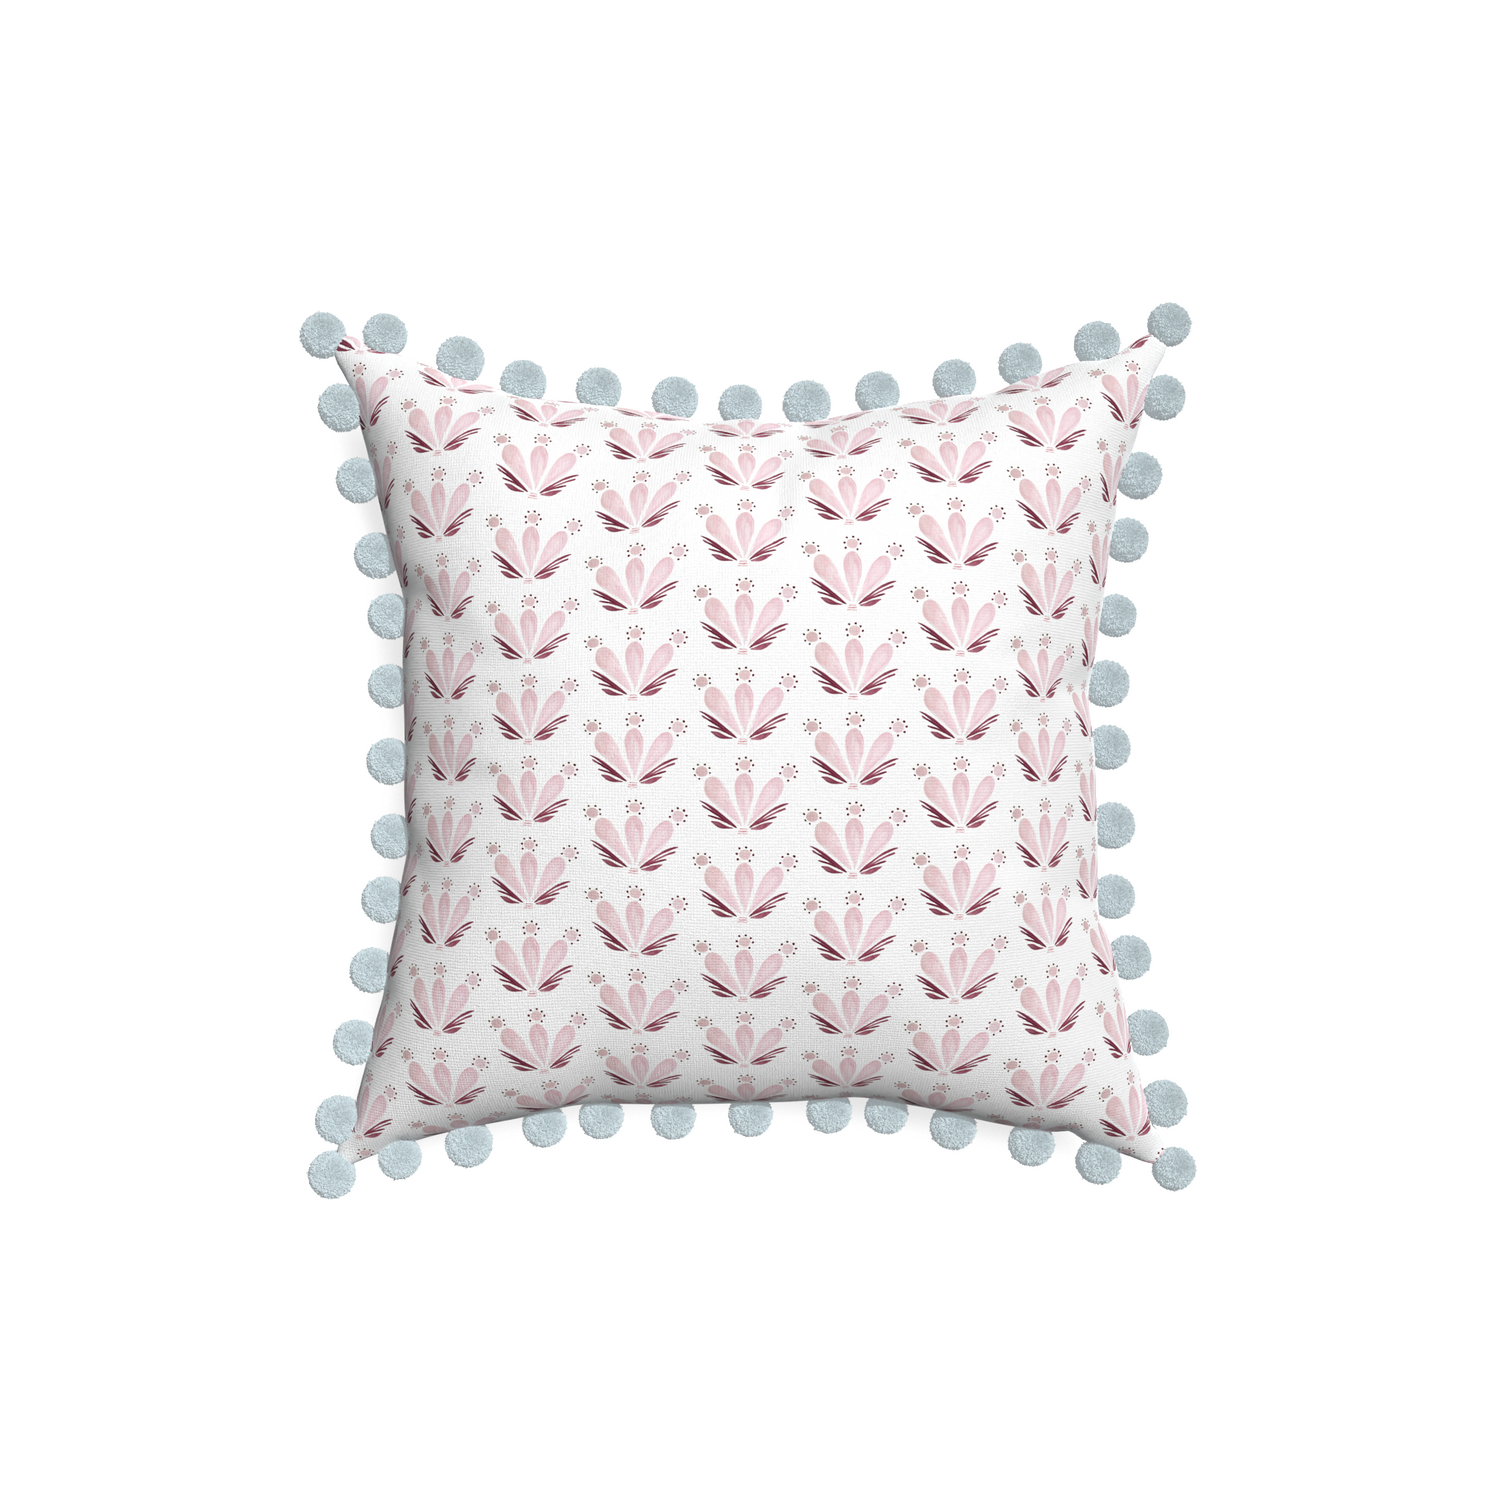 18-square serena pink custom pink & burgundy drop repeat floralpillow with powder pom pom on white background